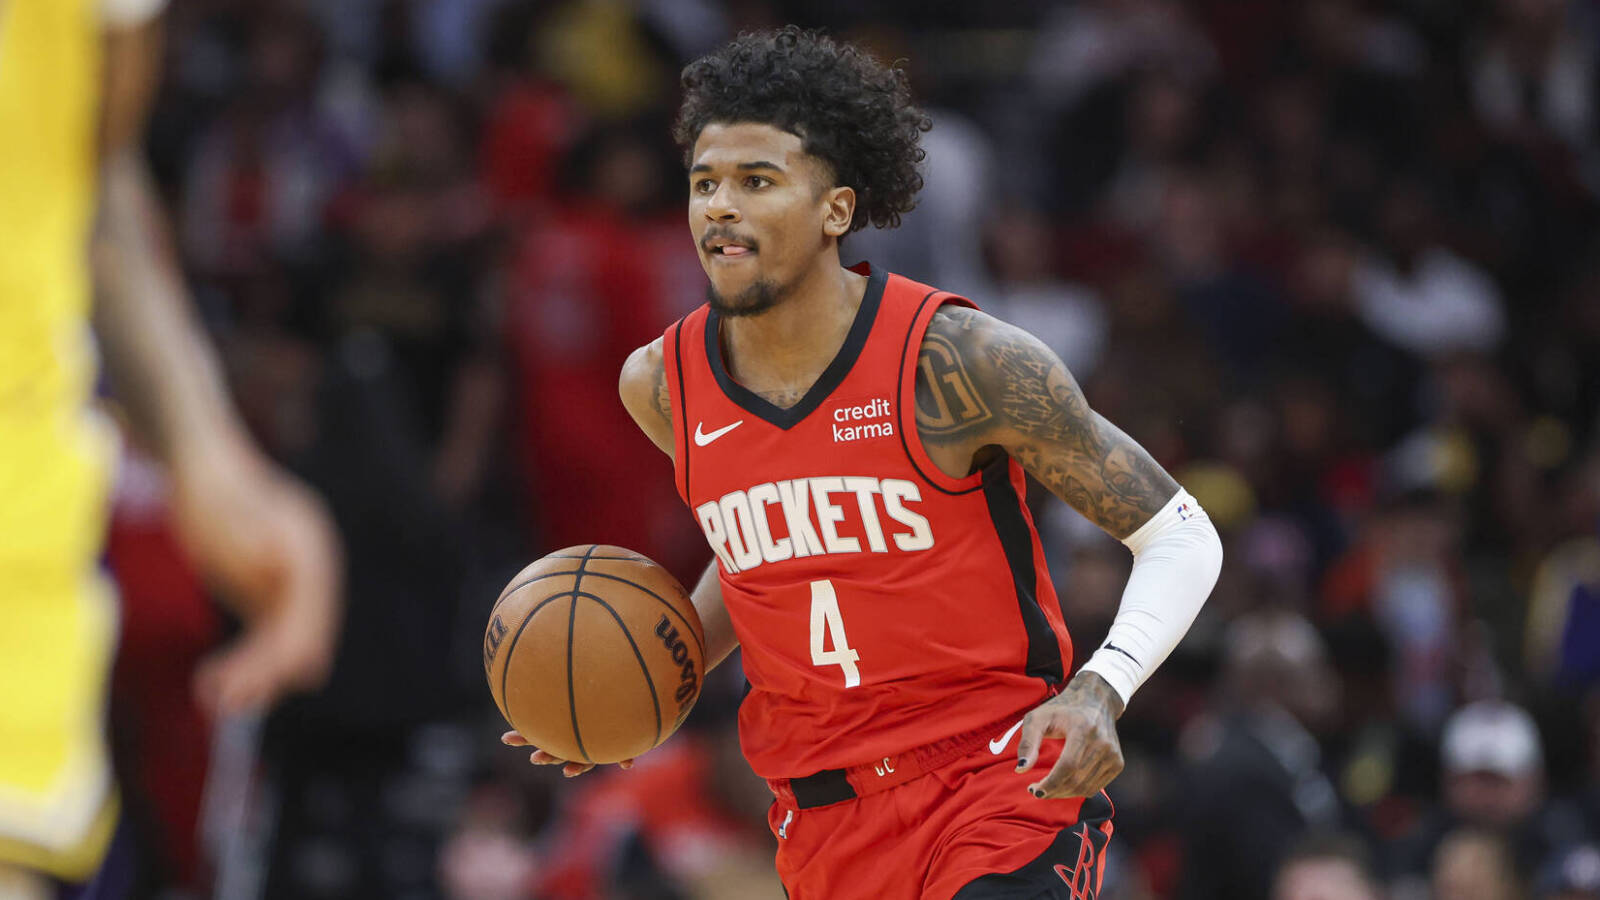 Report: Rockets could make stunning trade at deadline